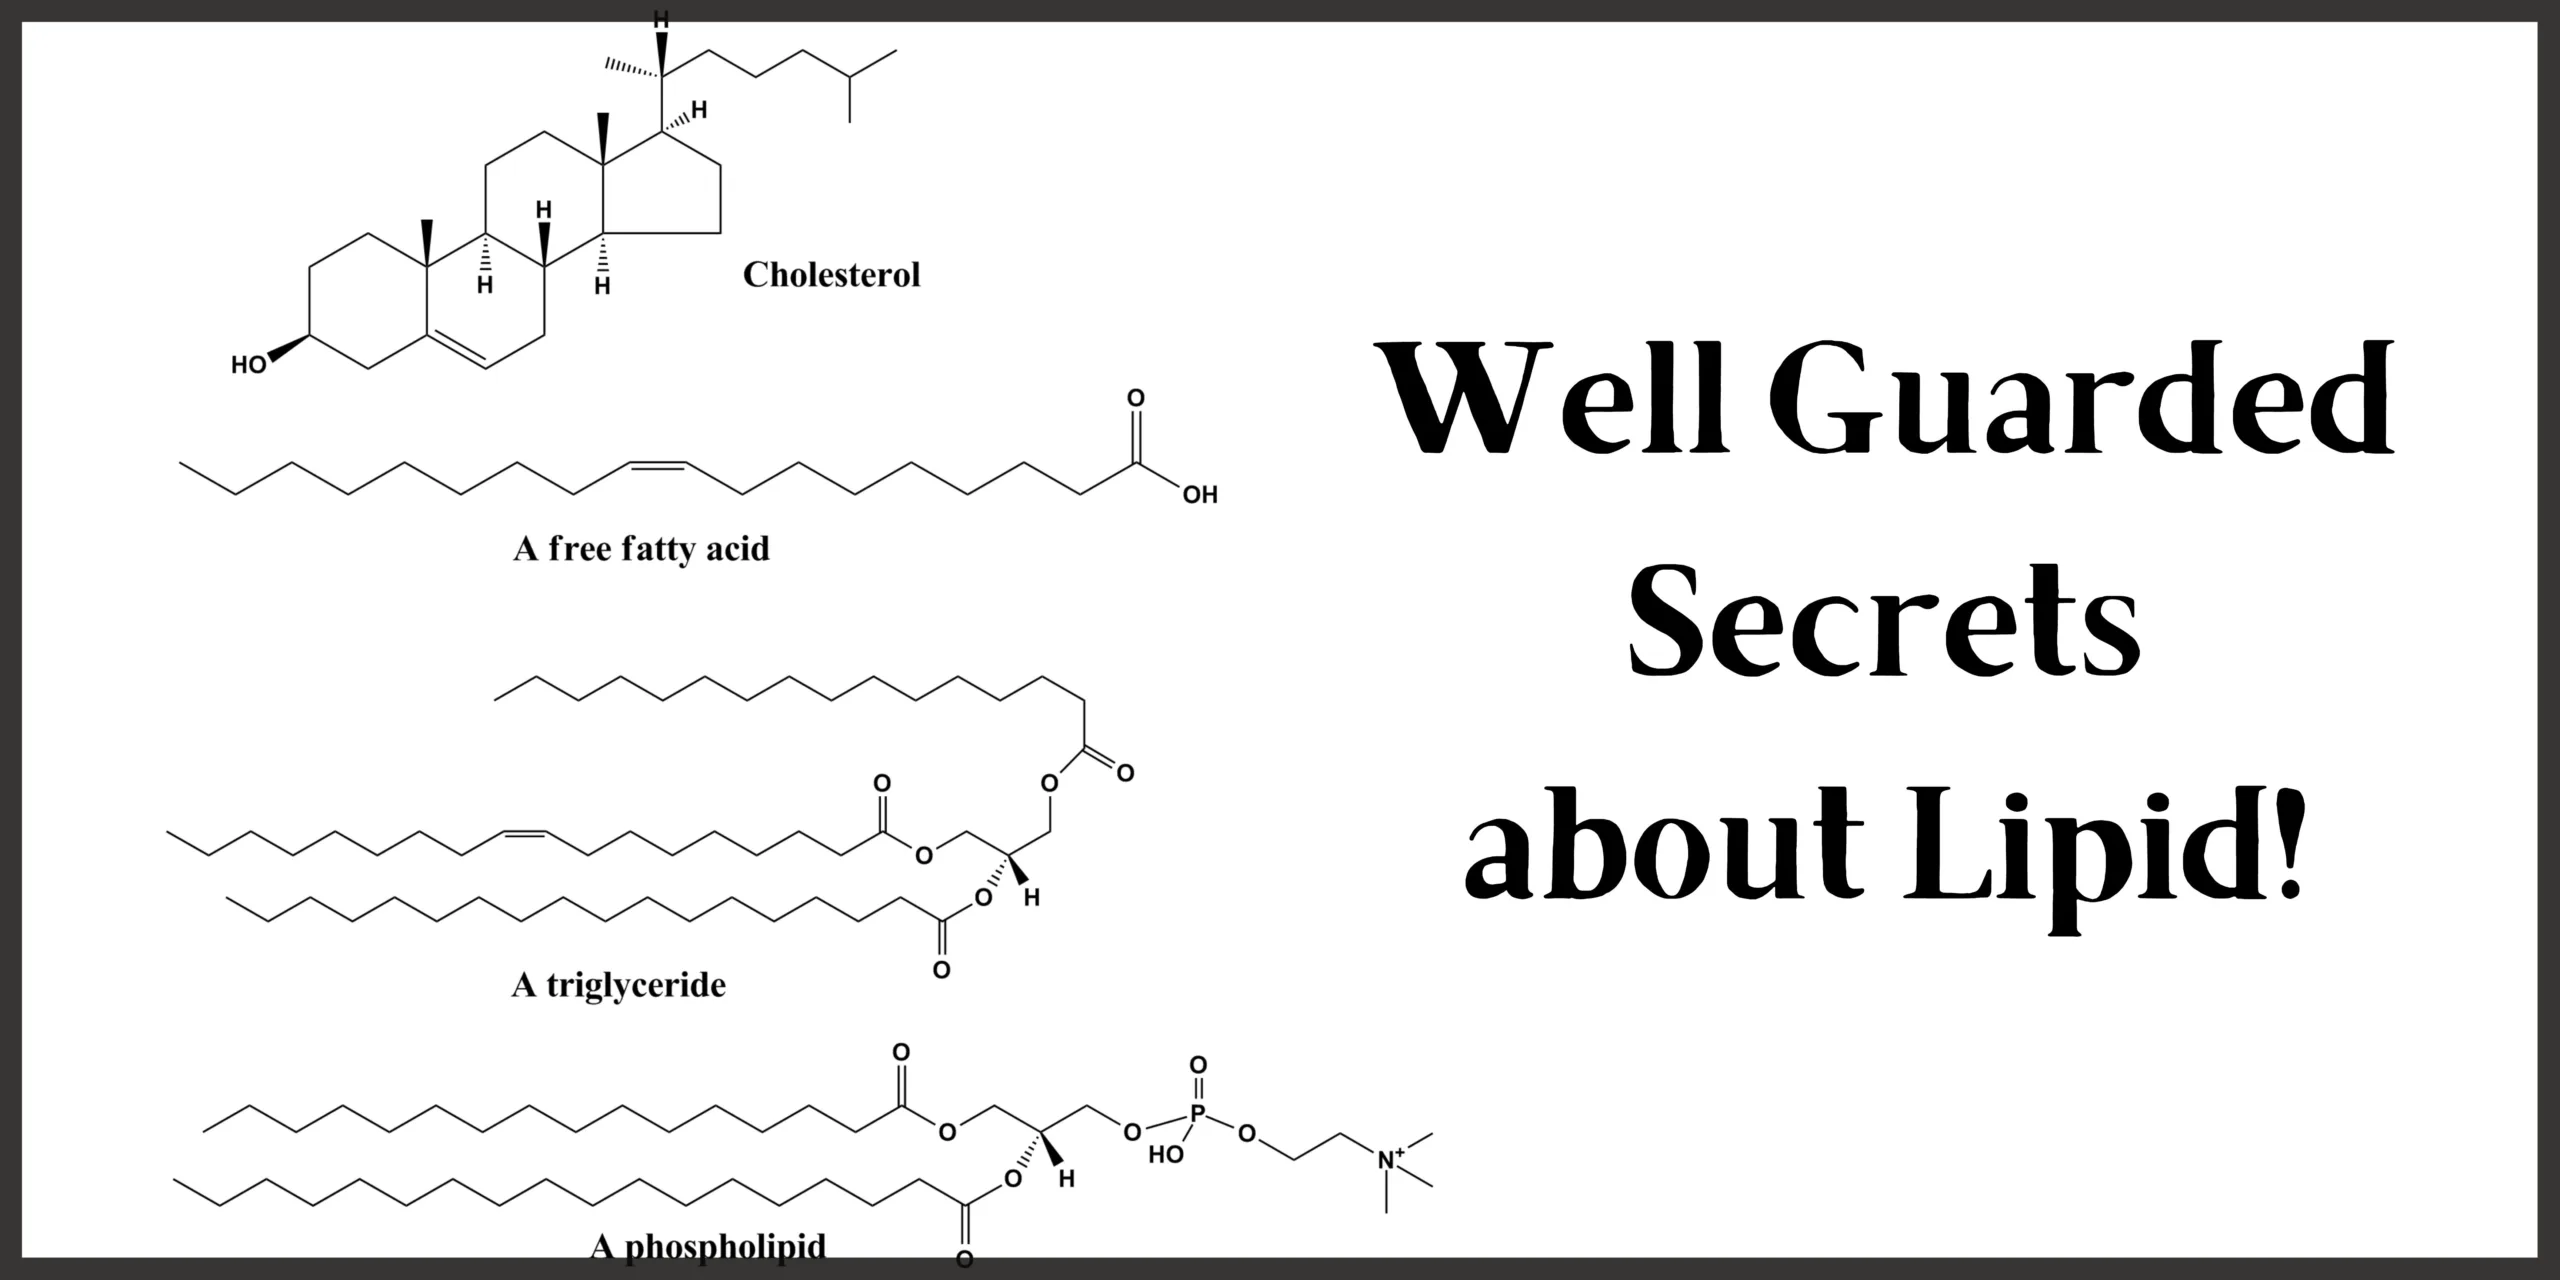 Well-guarded secrets about Lipid